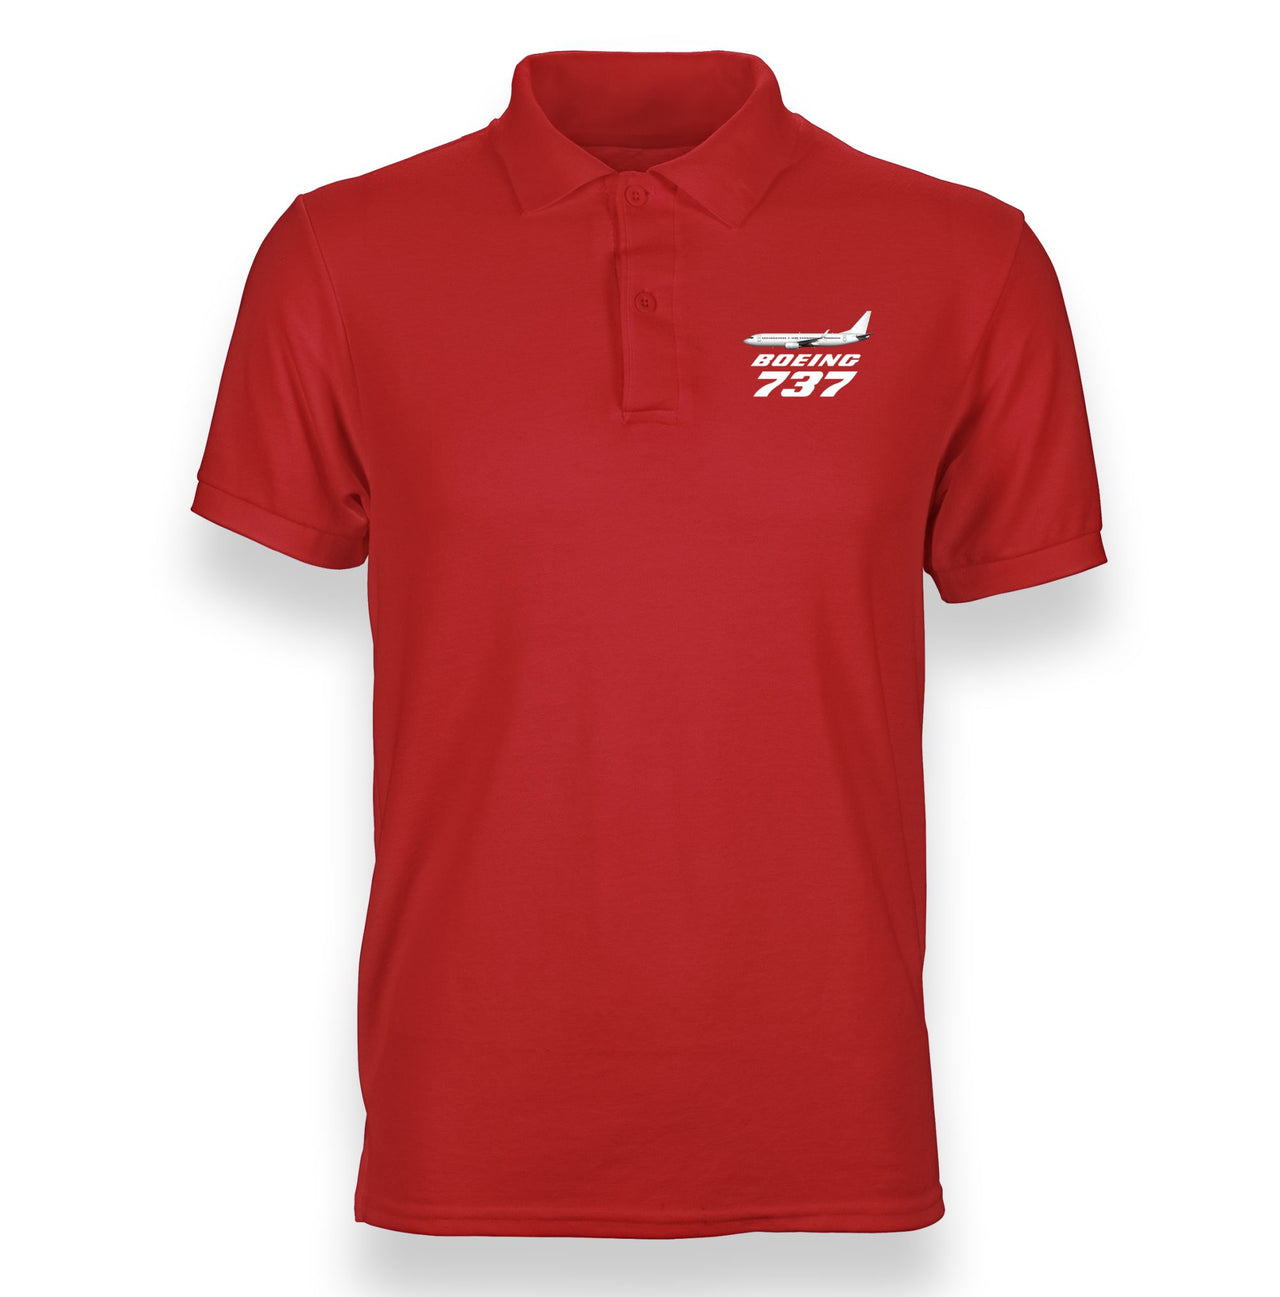 The Boeing 737 Designed "WOMEN" Polo T-Shirts